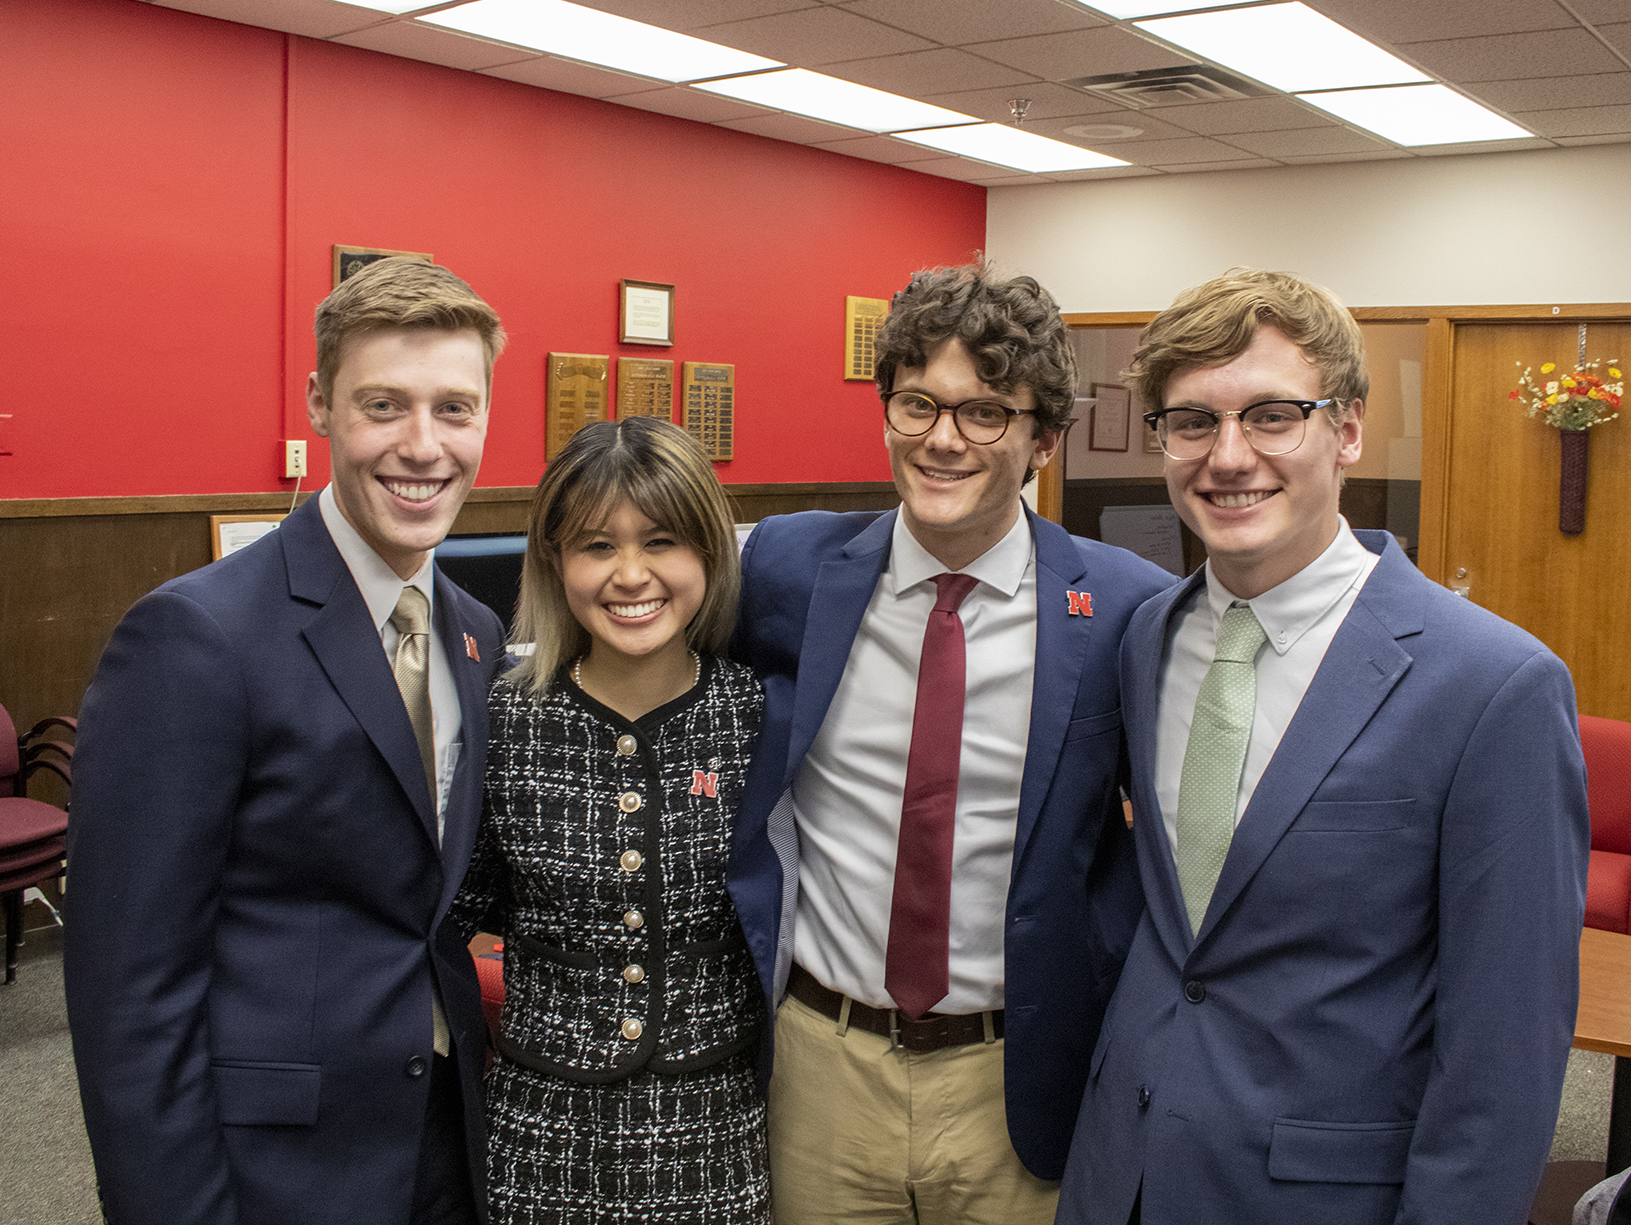 From left to right: Jacob Drake, Christine Trinh, and Alec Miller, with Paul Pechous.  